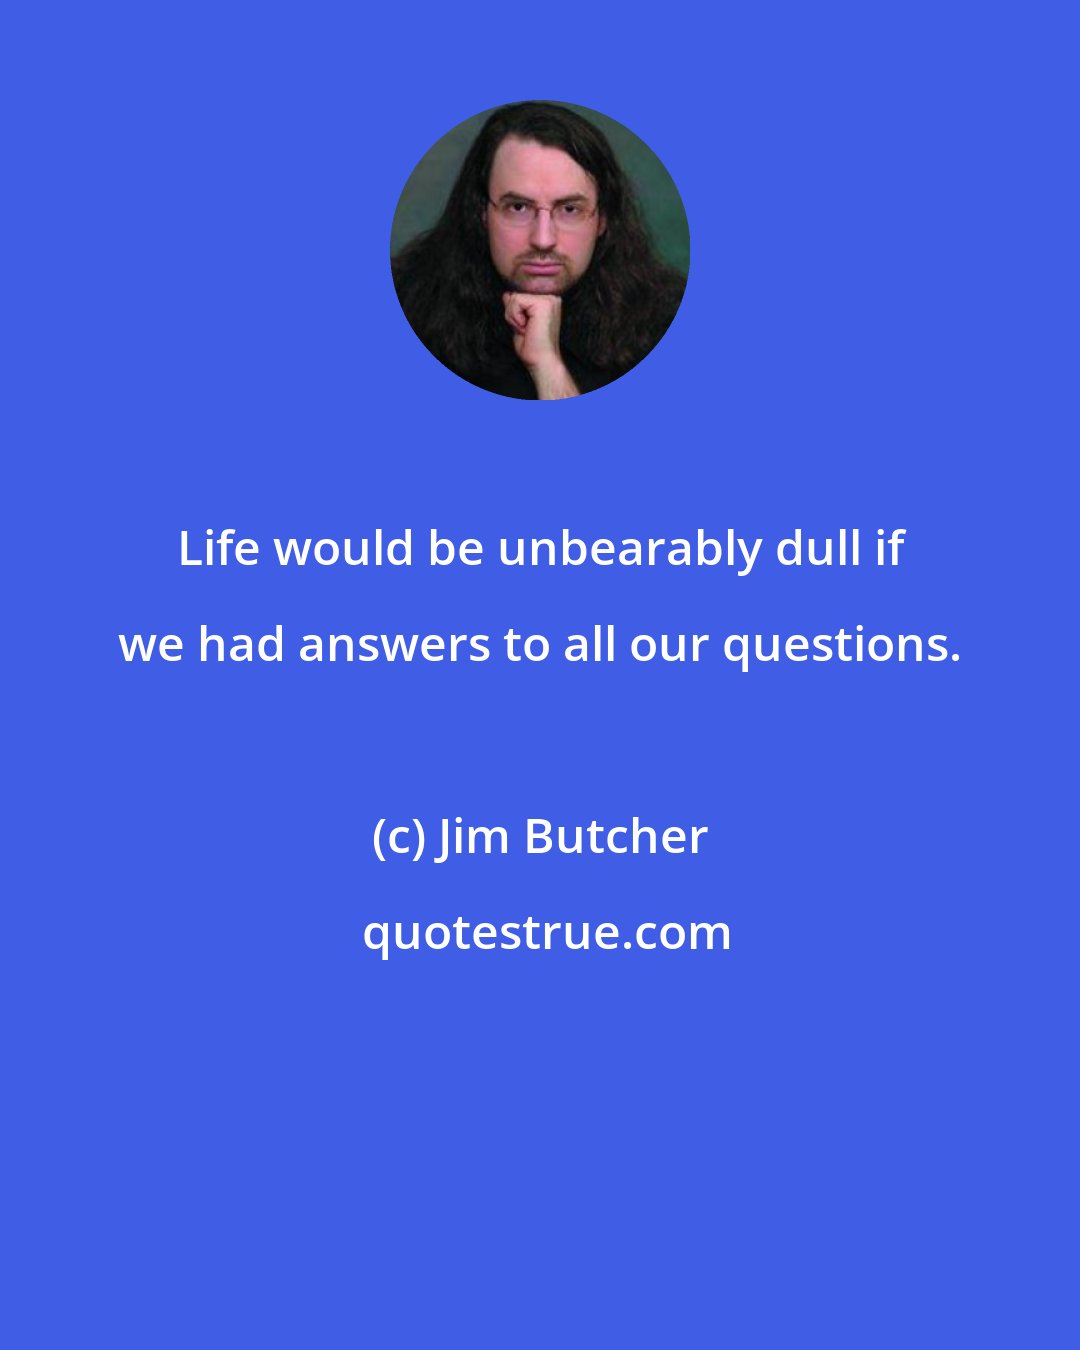 Jim Butcher: Life would be unbearably dull if we had answers to all our questions.